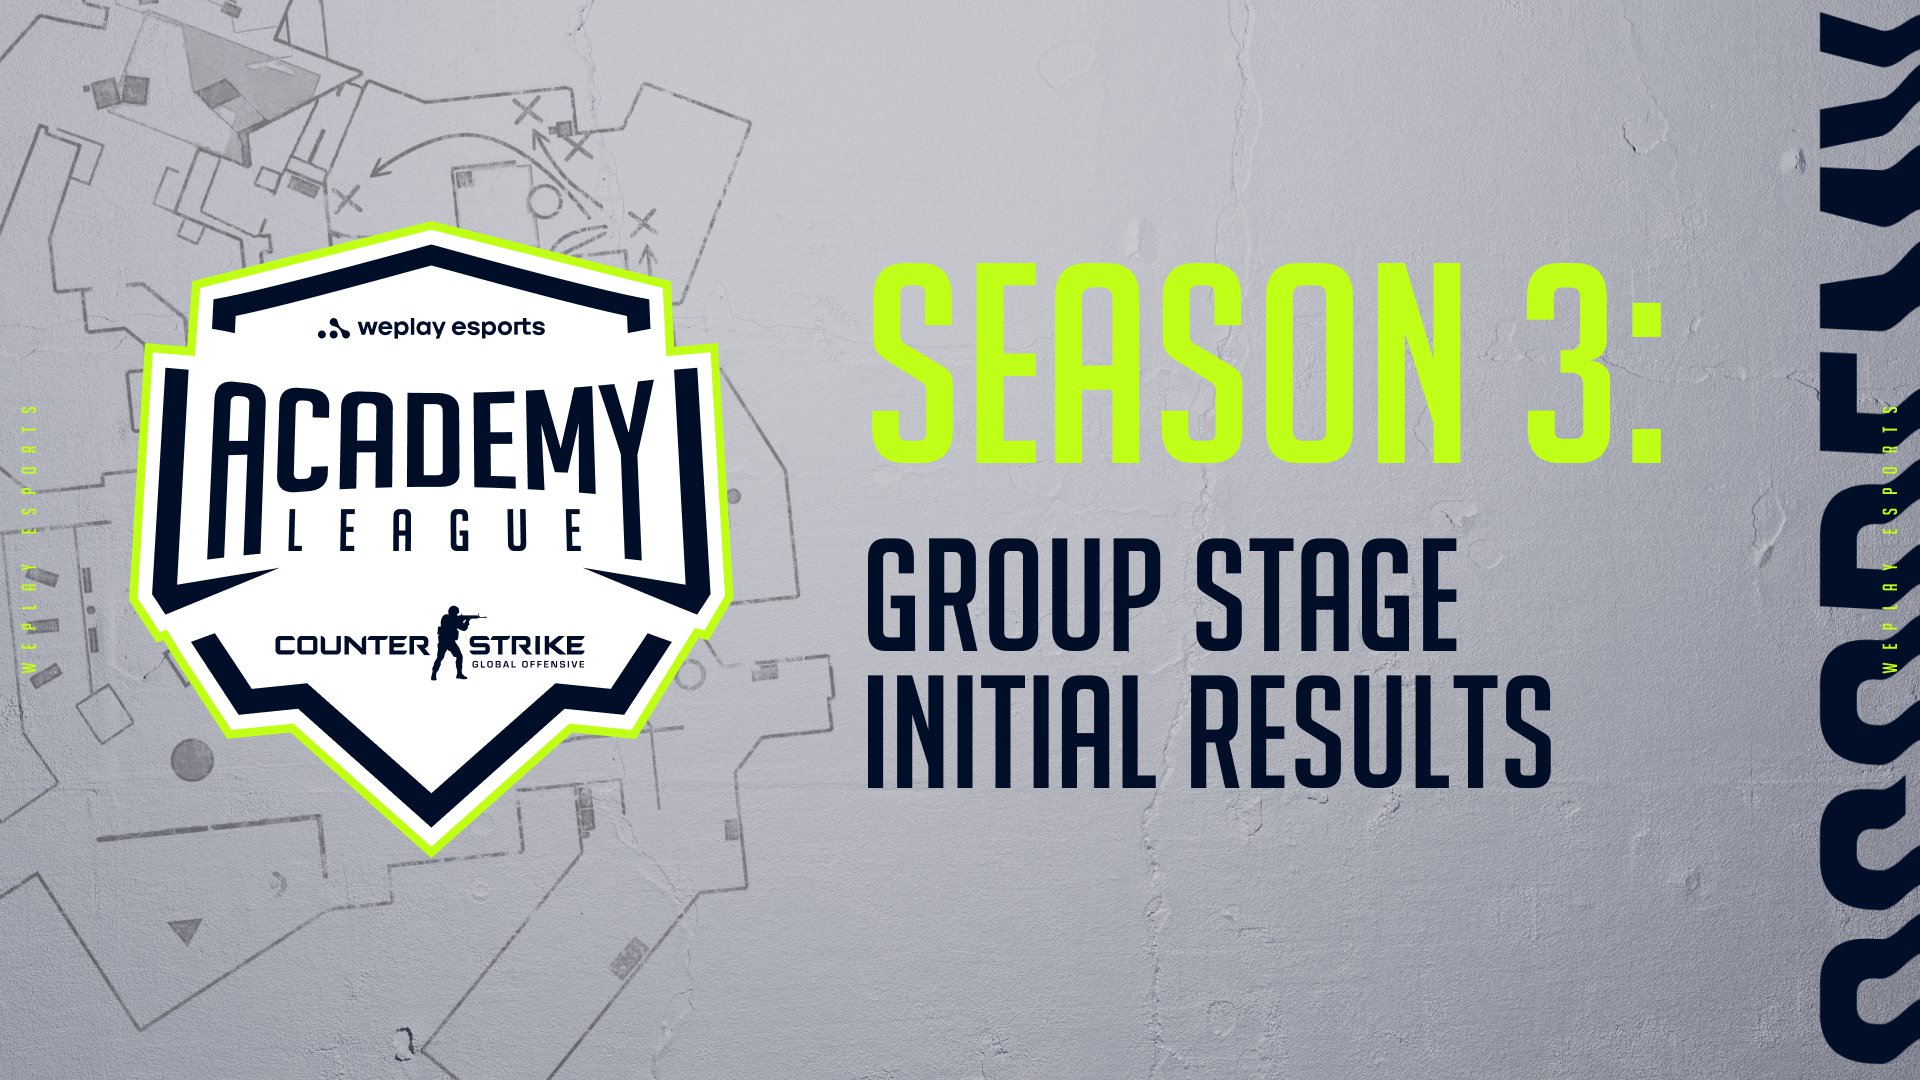 WePlay Academy League Season 3: Group Stage Initial Results. Image: WePlay Holding